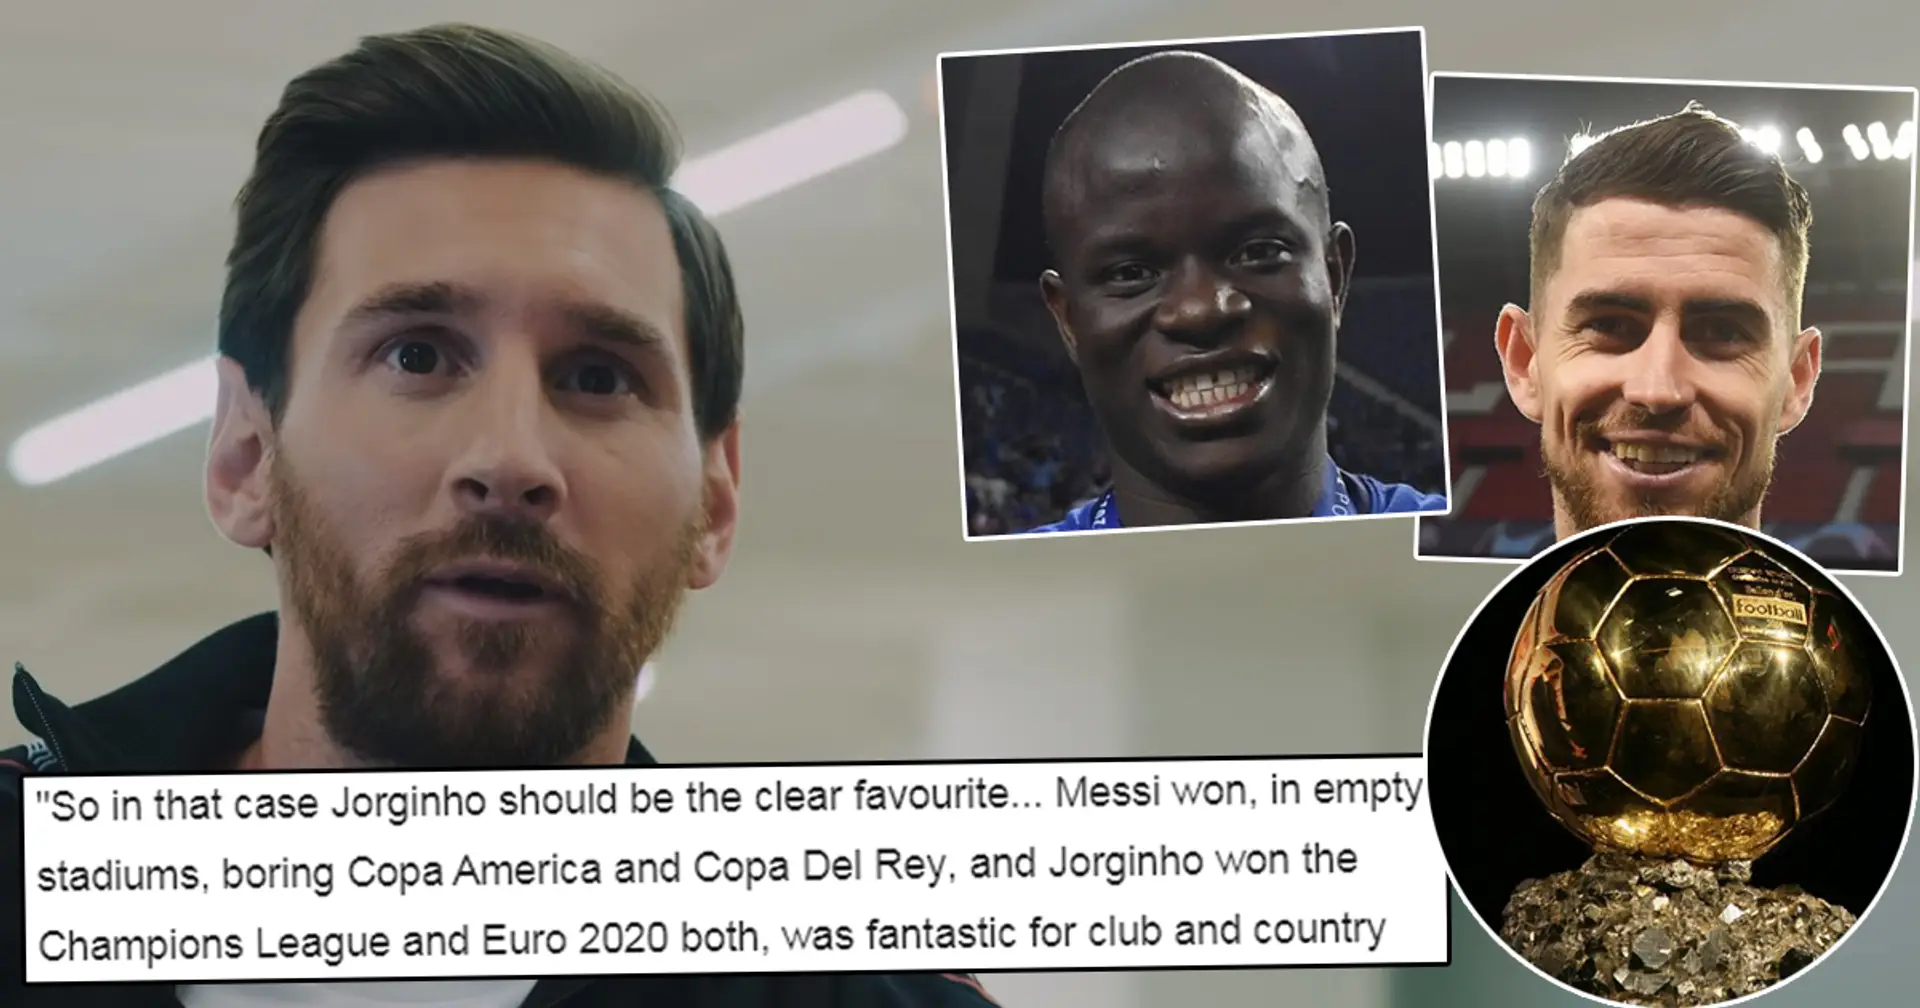 'Both Messi and Ronaldo showed nothing last season': Why Chelsea fans think Kante or Jorginho should win Ballon d'Or